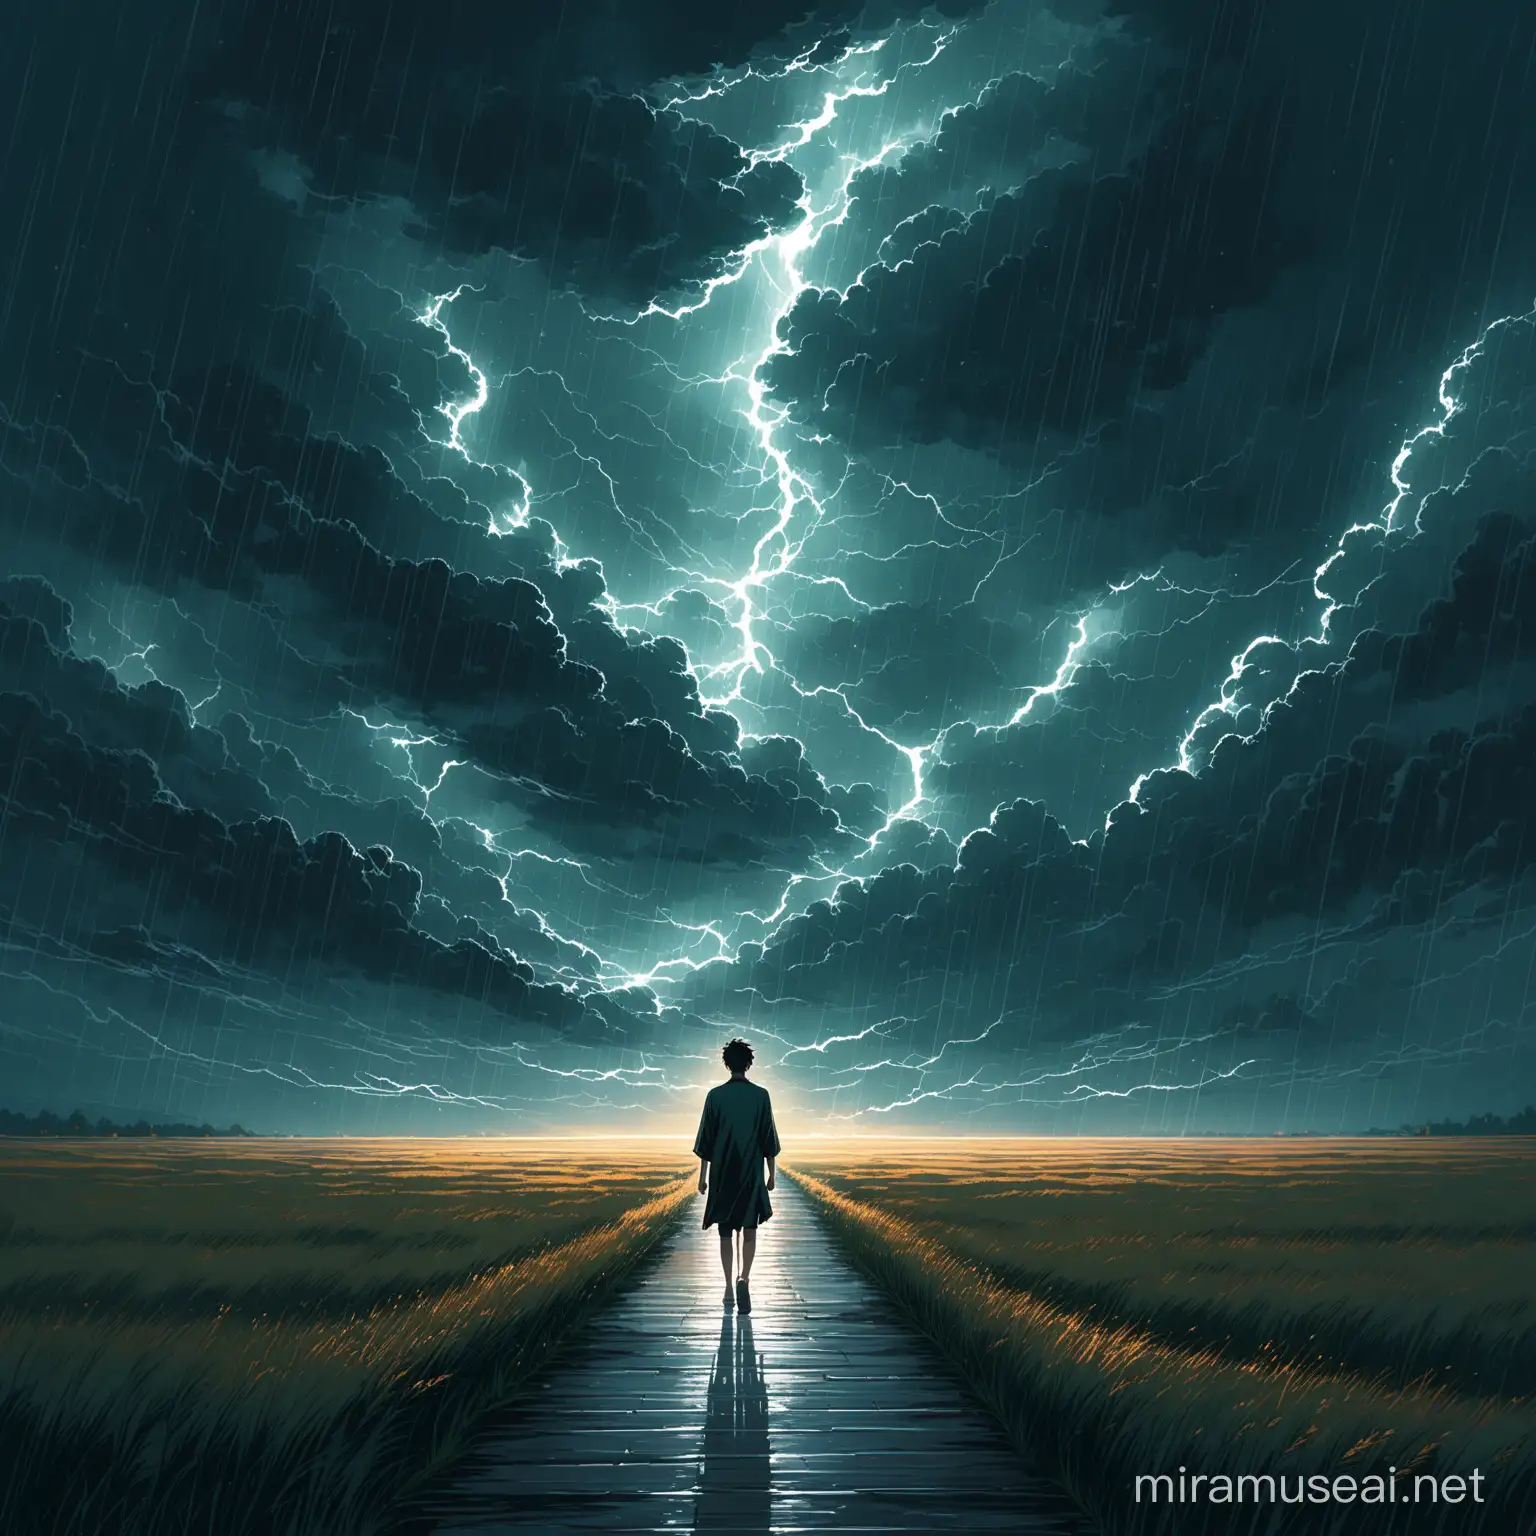 Young Man Striding Confidently in a Stormy Landscape